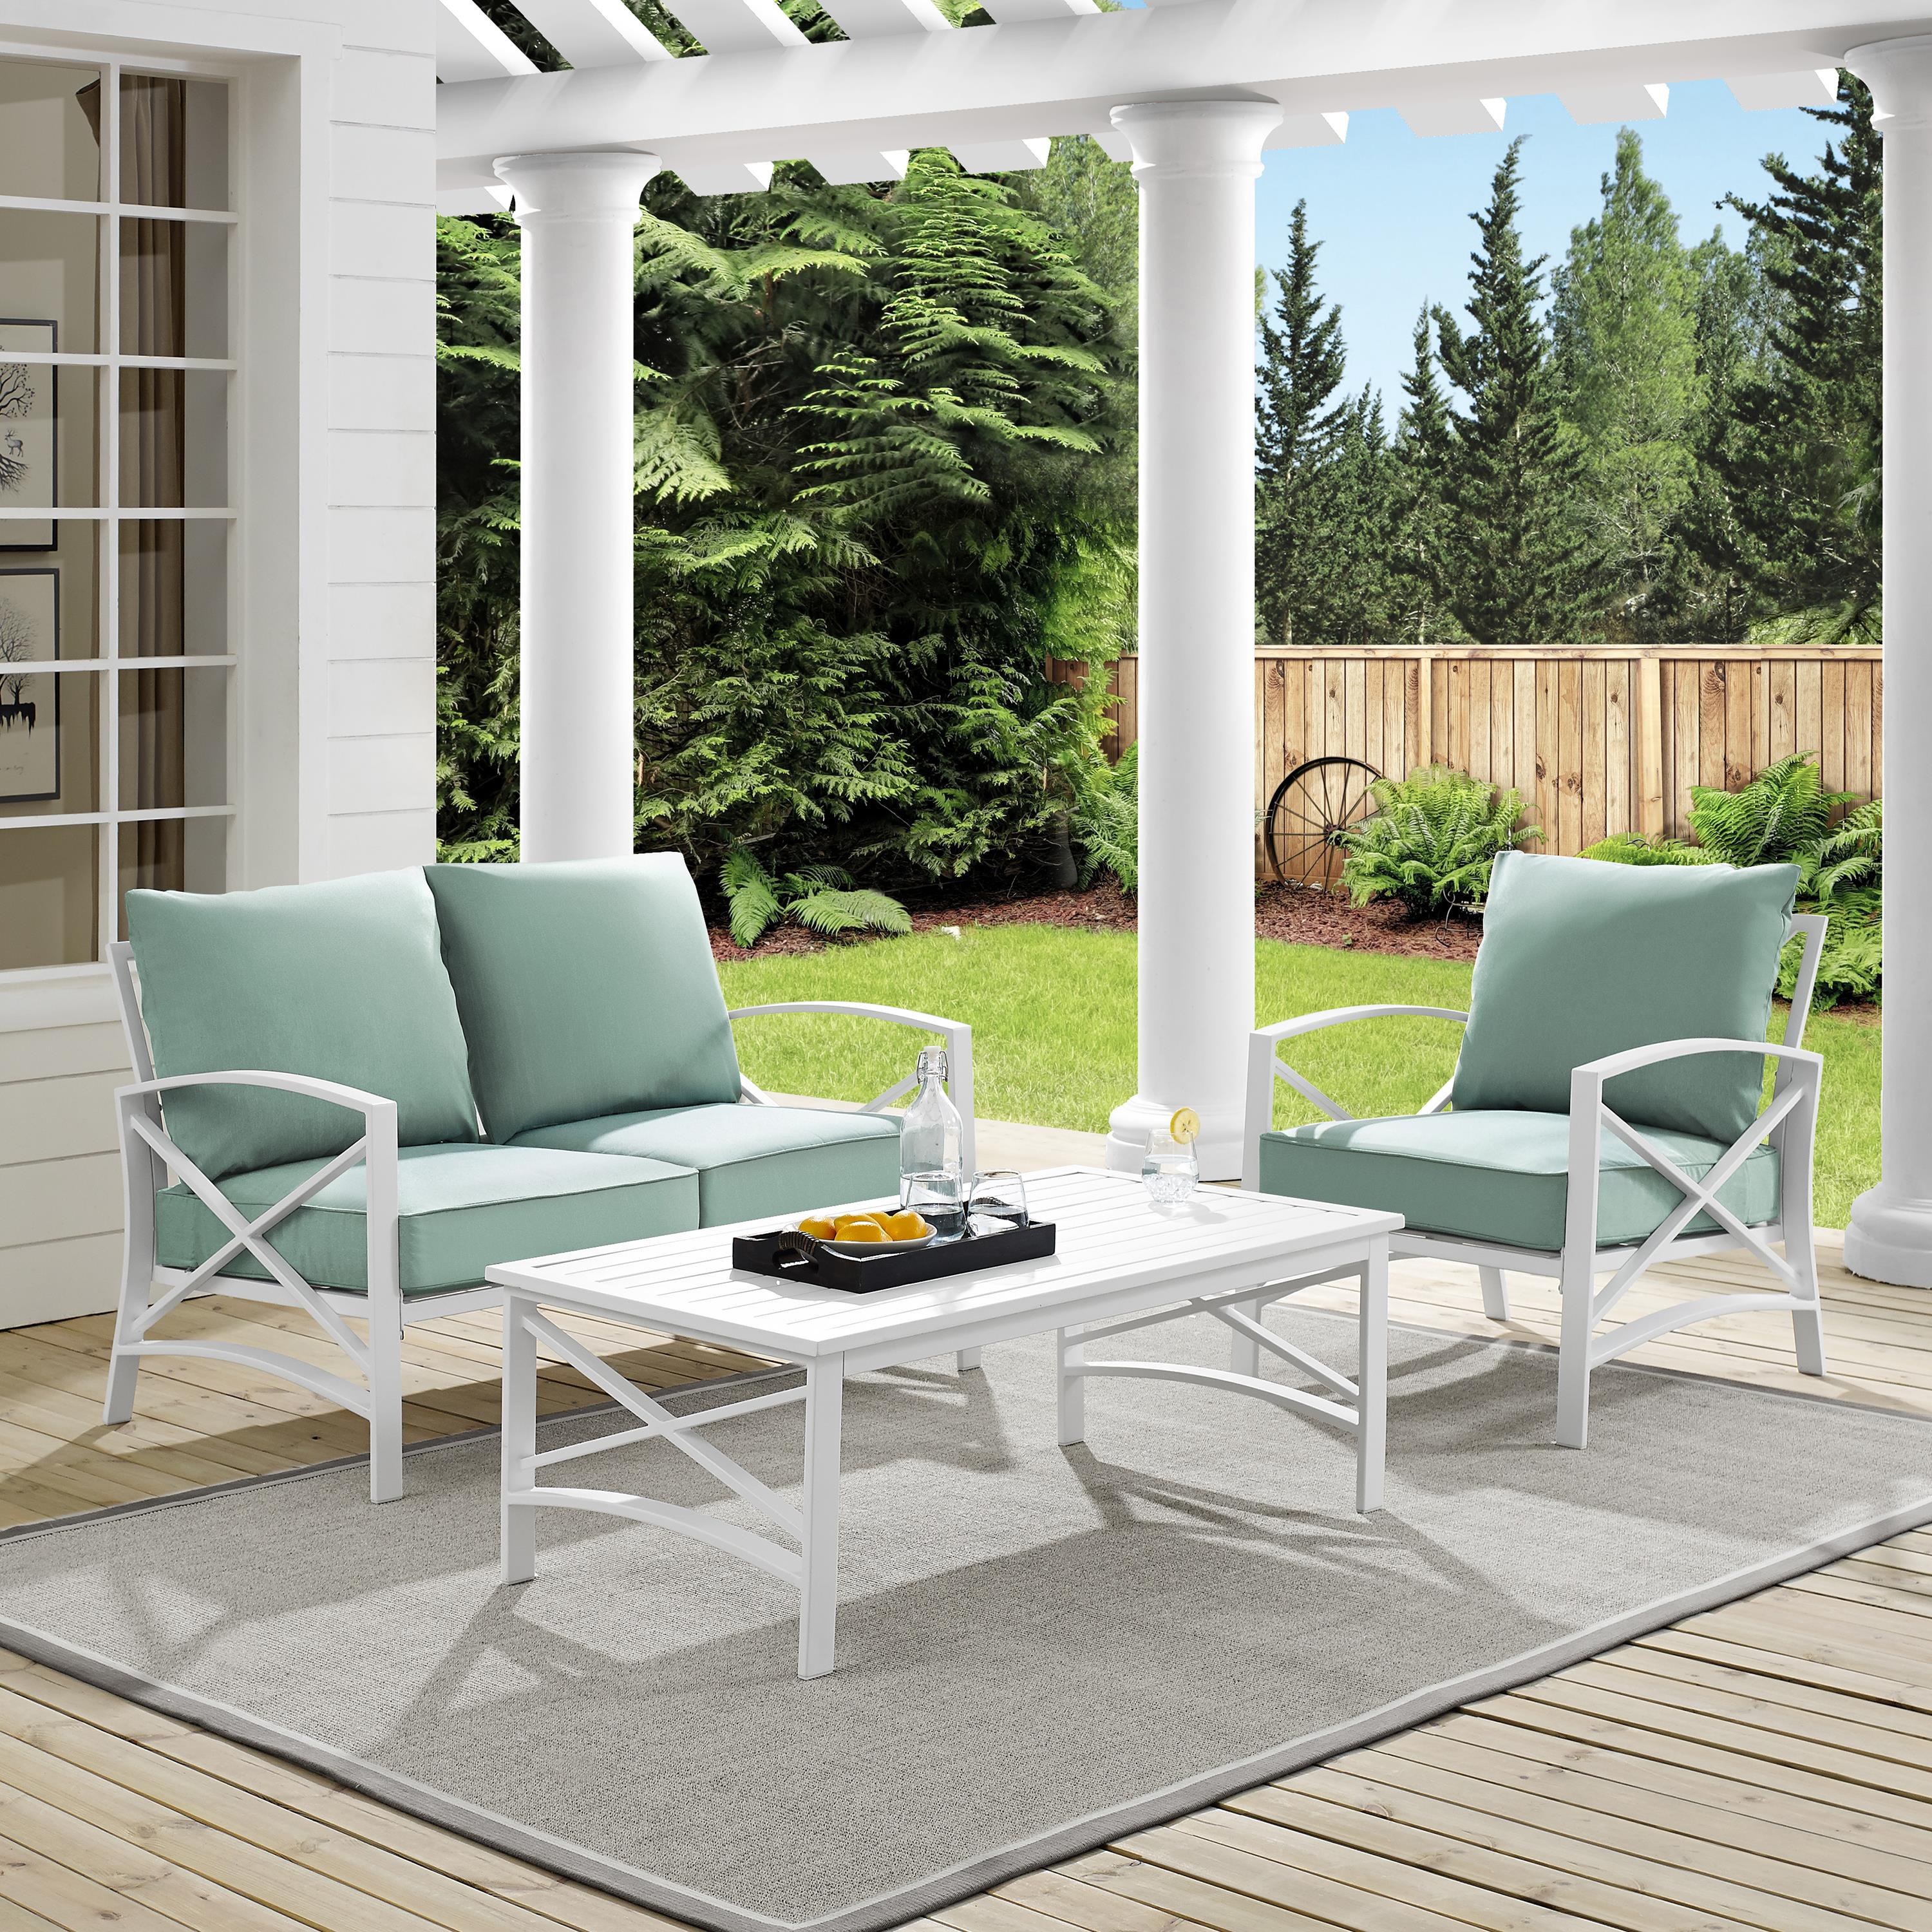 Crosley Kaplan 3 Piece Patio Sofa Set in Mist and White - image 2 of 6